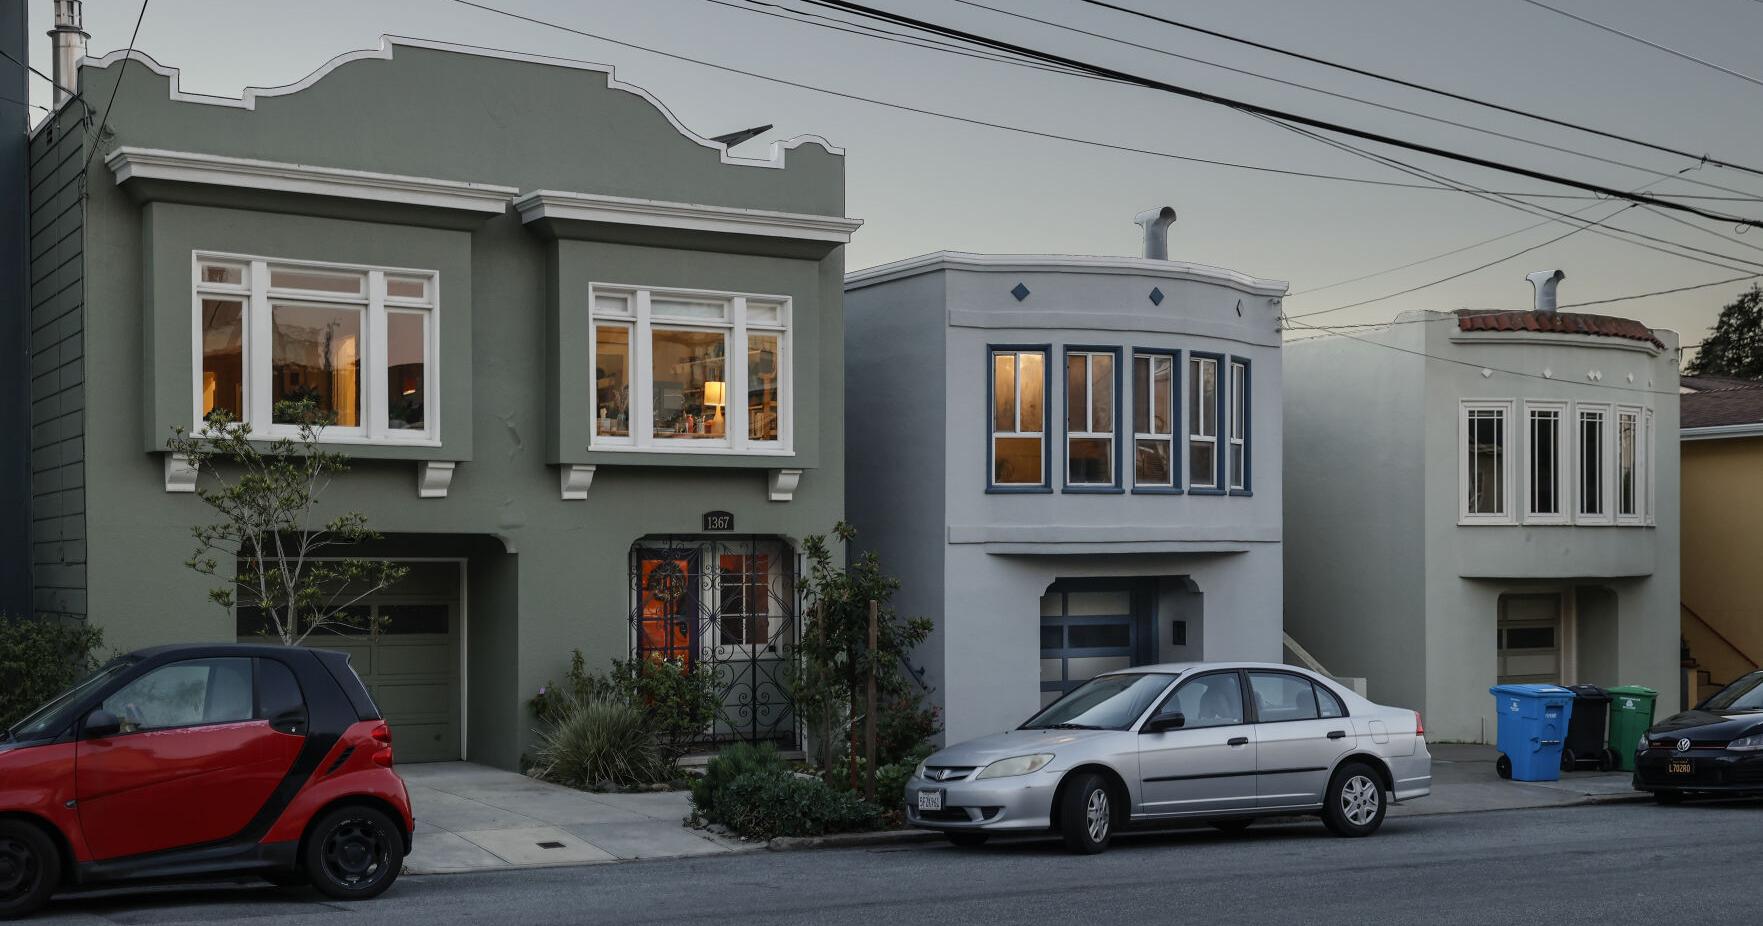 Death of the single family home in San Francisco? Not quite